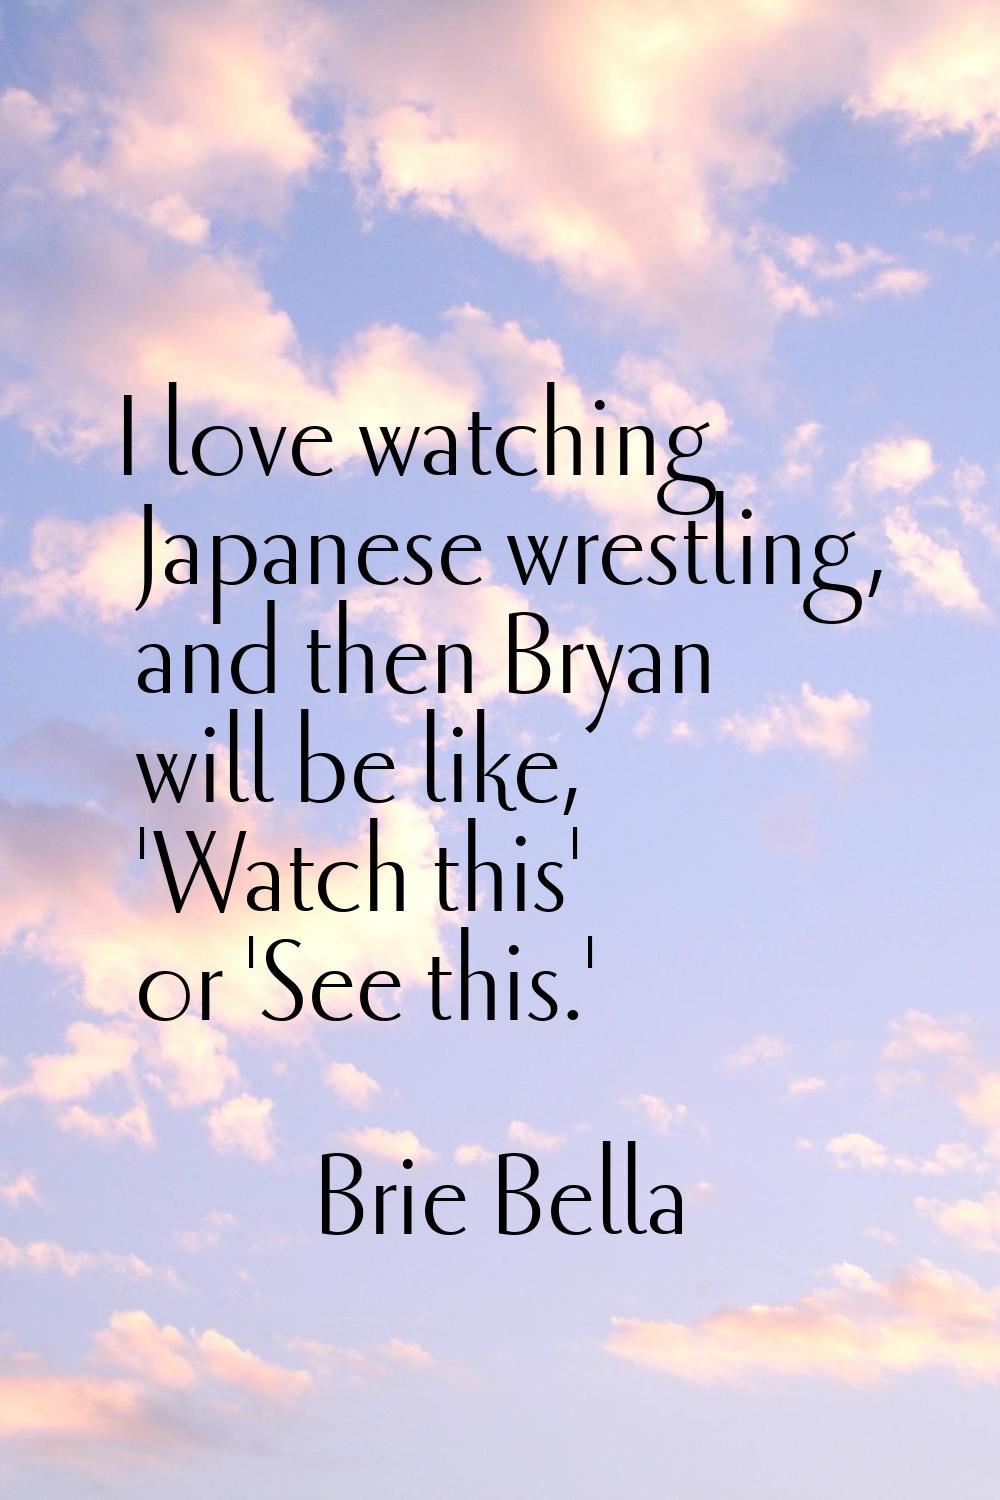 I love watching Japanese wrestling, and then Bryan will be like, 'Watch this' or 'See this.'